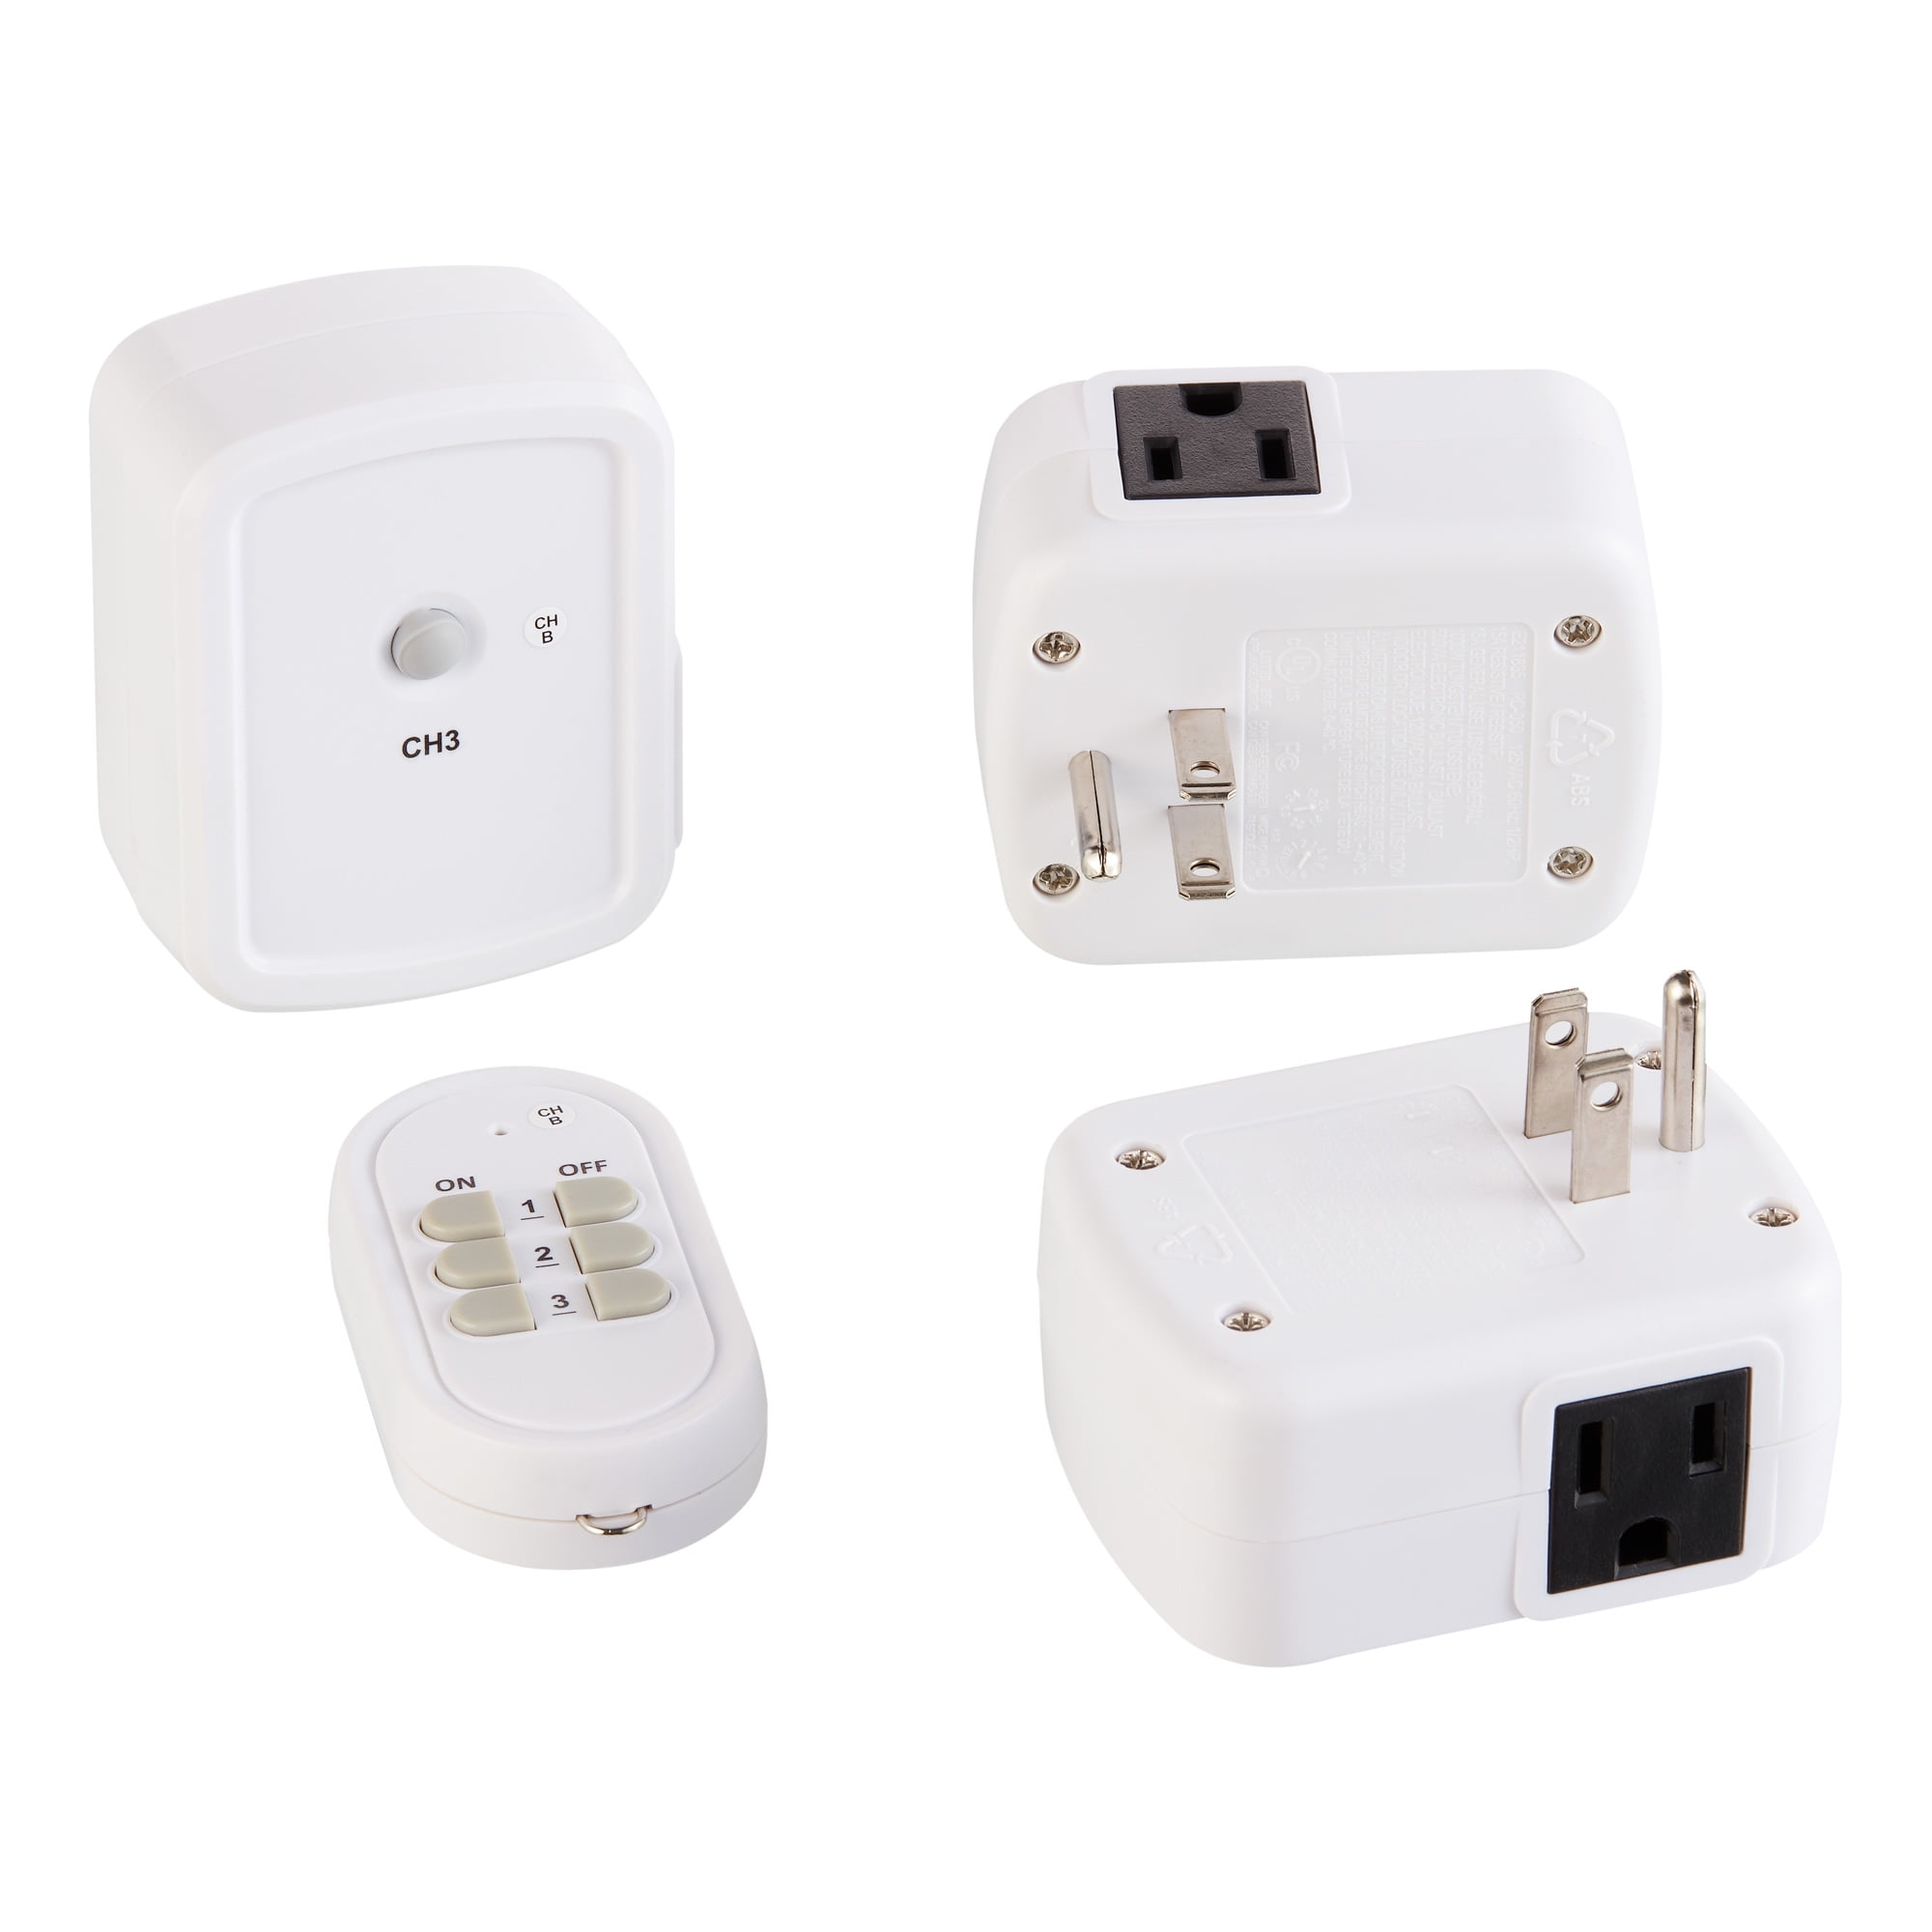 Holiday Time Wireless Outlet and Remote with 100 Foot Range, 3-Pack 